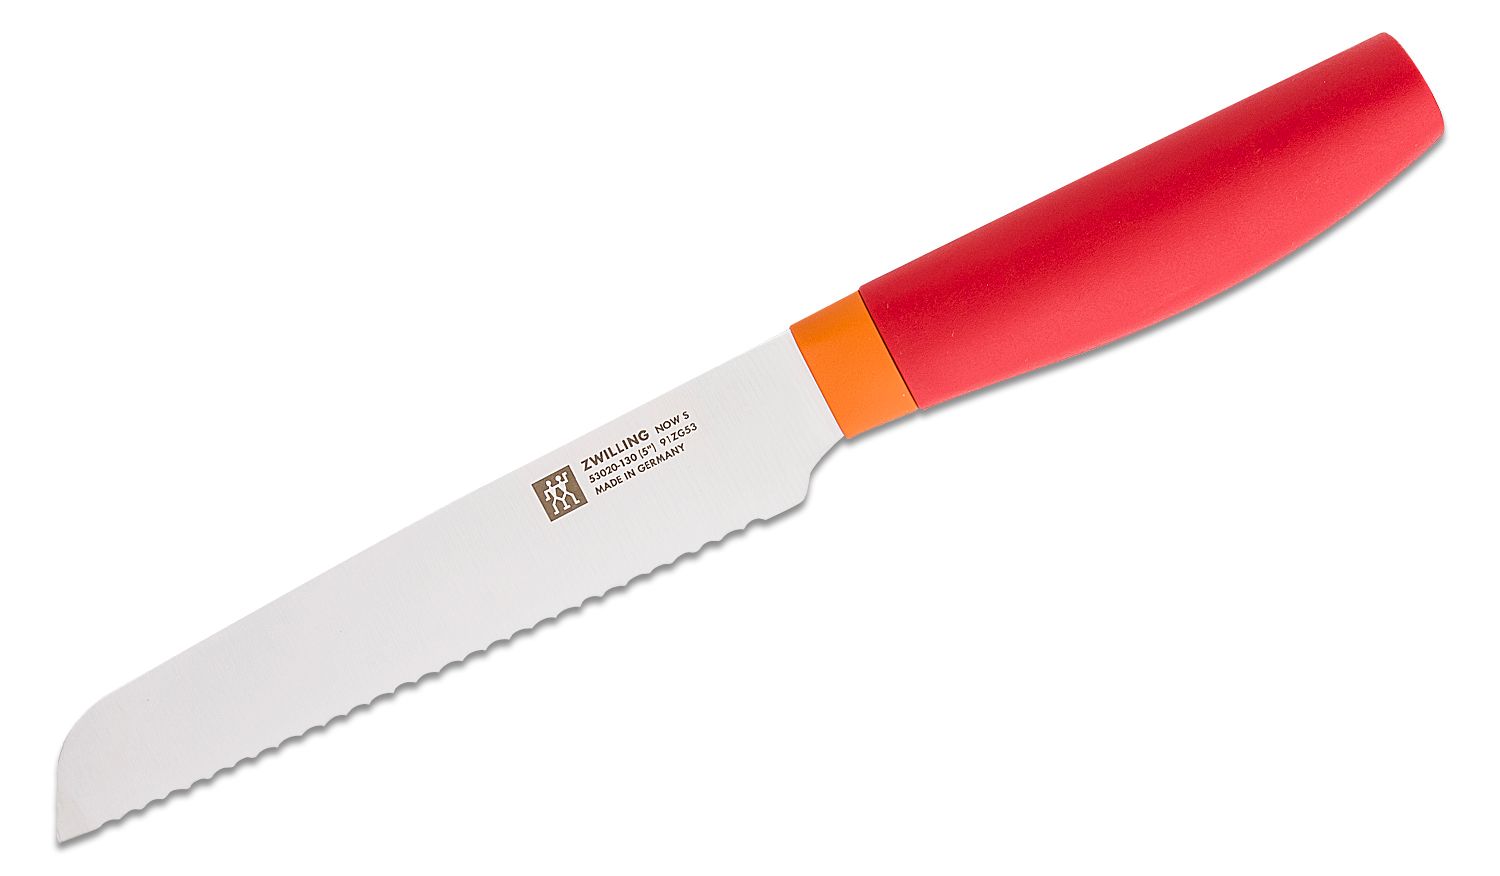 Henckels Solution 5-inch Serrated Utility Knife & Reviews